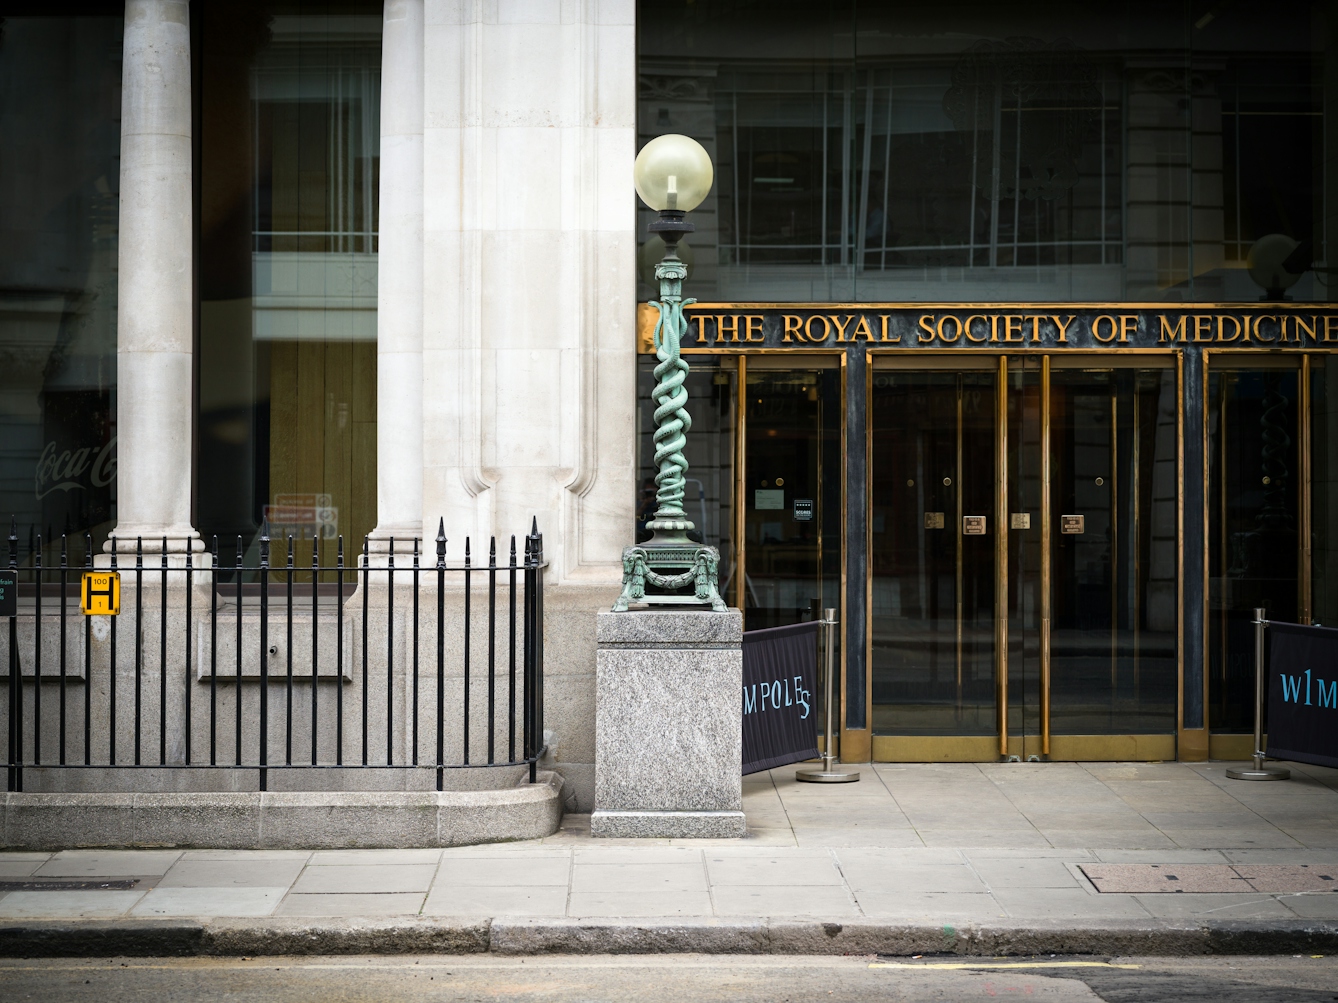 Lamp outside the Royal Society of Medicine, London featuring two snakes entwined.